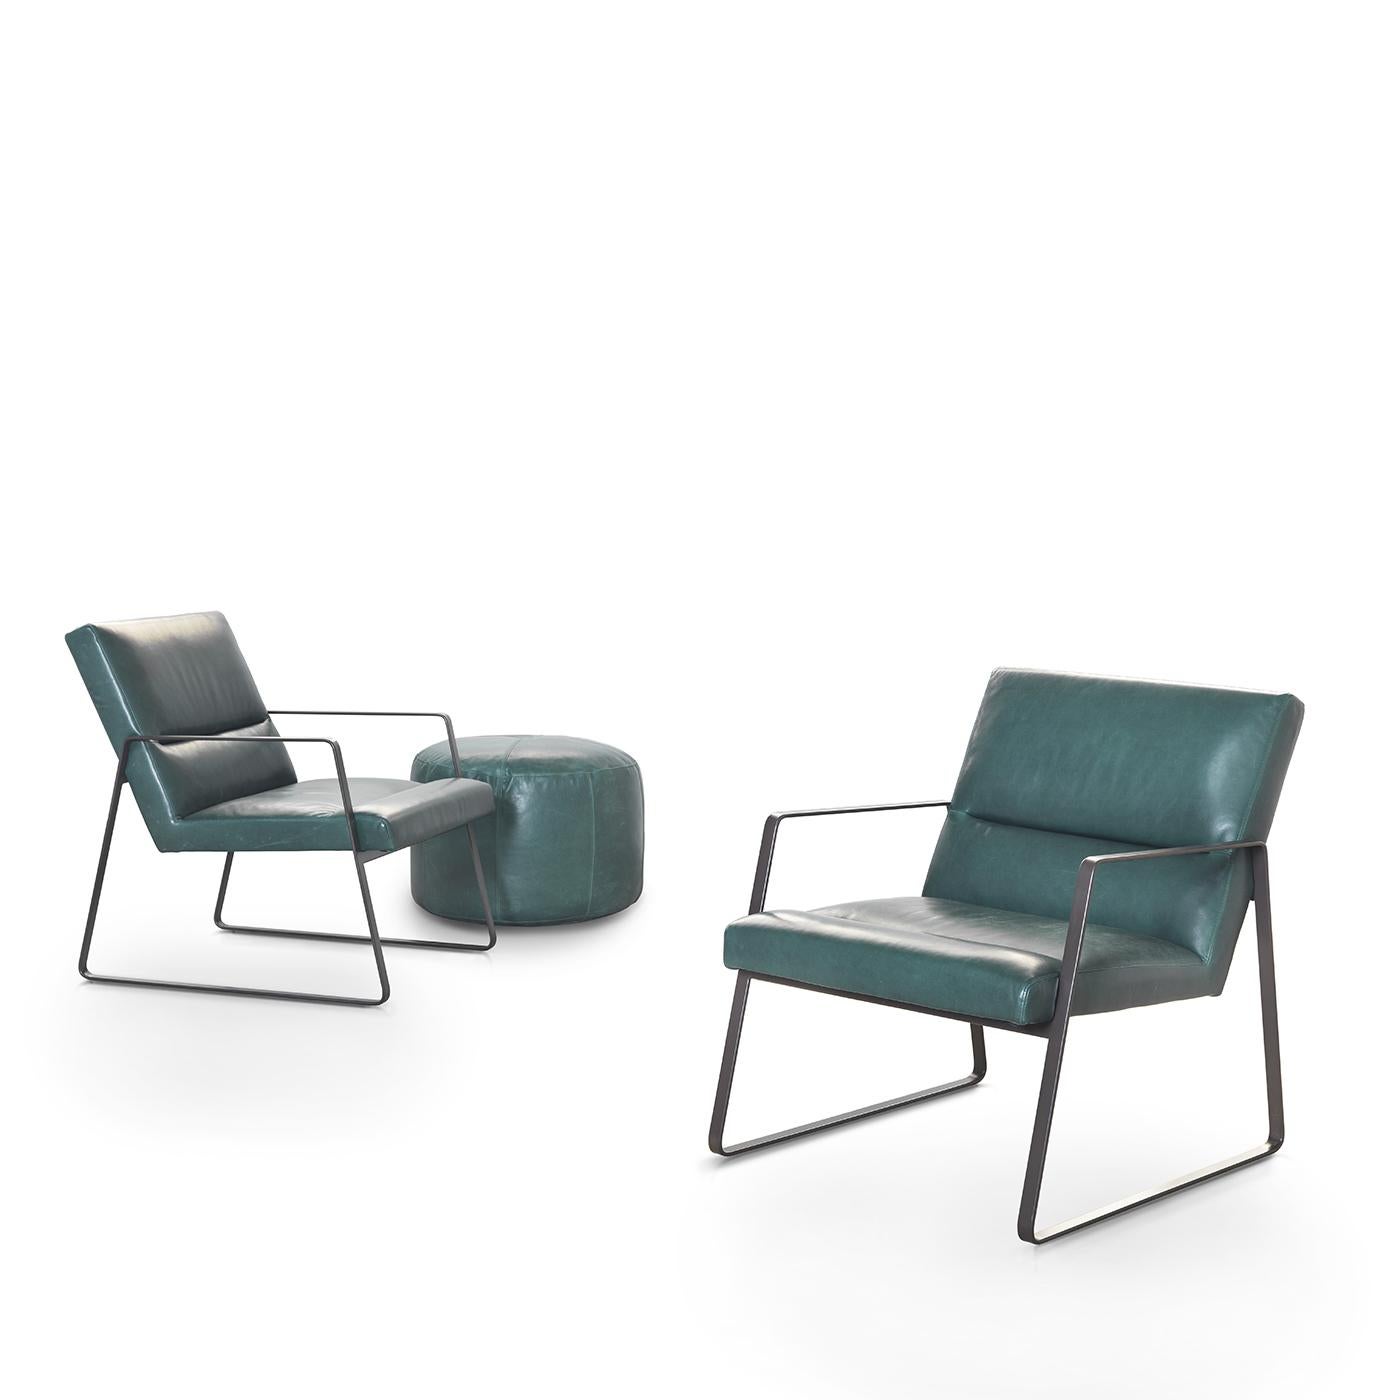 The sophisticated lines and contemporary structure of this emerald green leather armchair is almost reminiscent of a movie theater seat with its slightly-reclined backrest. Large minimal metal trapezoids serve both as armrests and a base for the